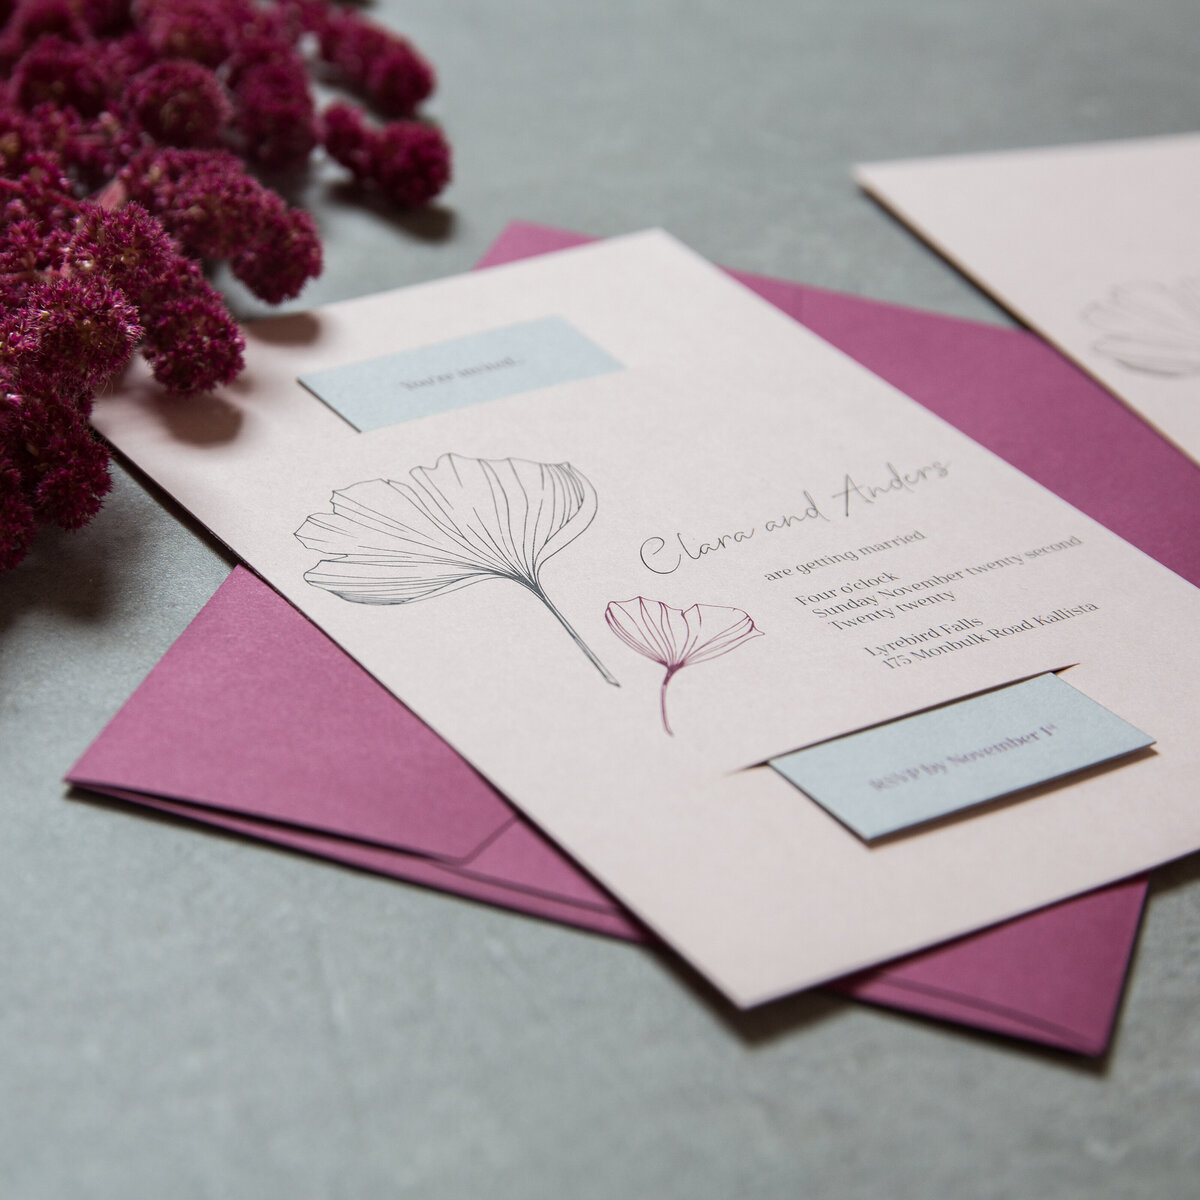 Pink wedding invitation with ginkgo leak design and grey rsvp card and purple envelope